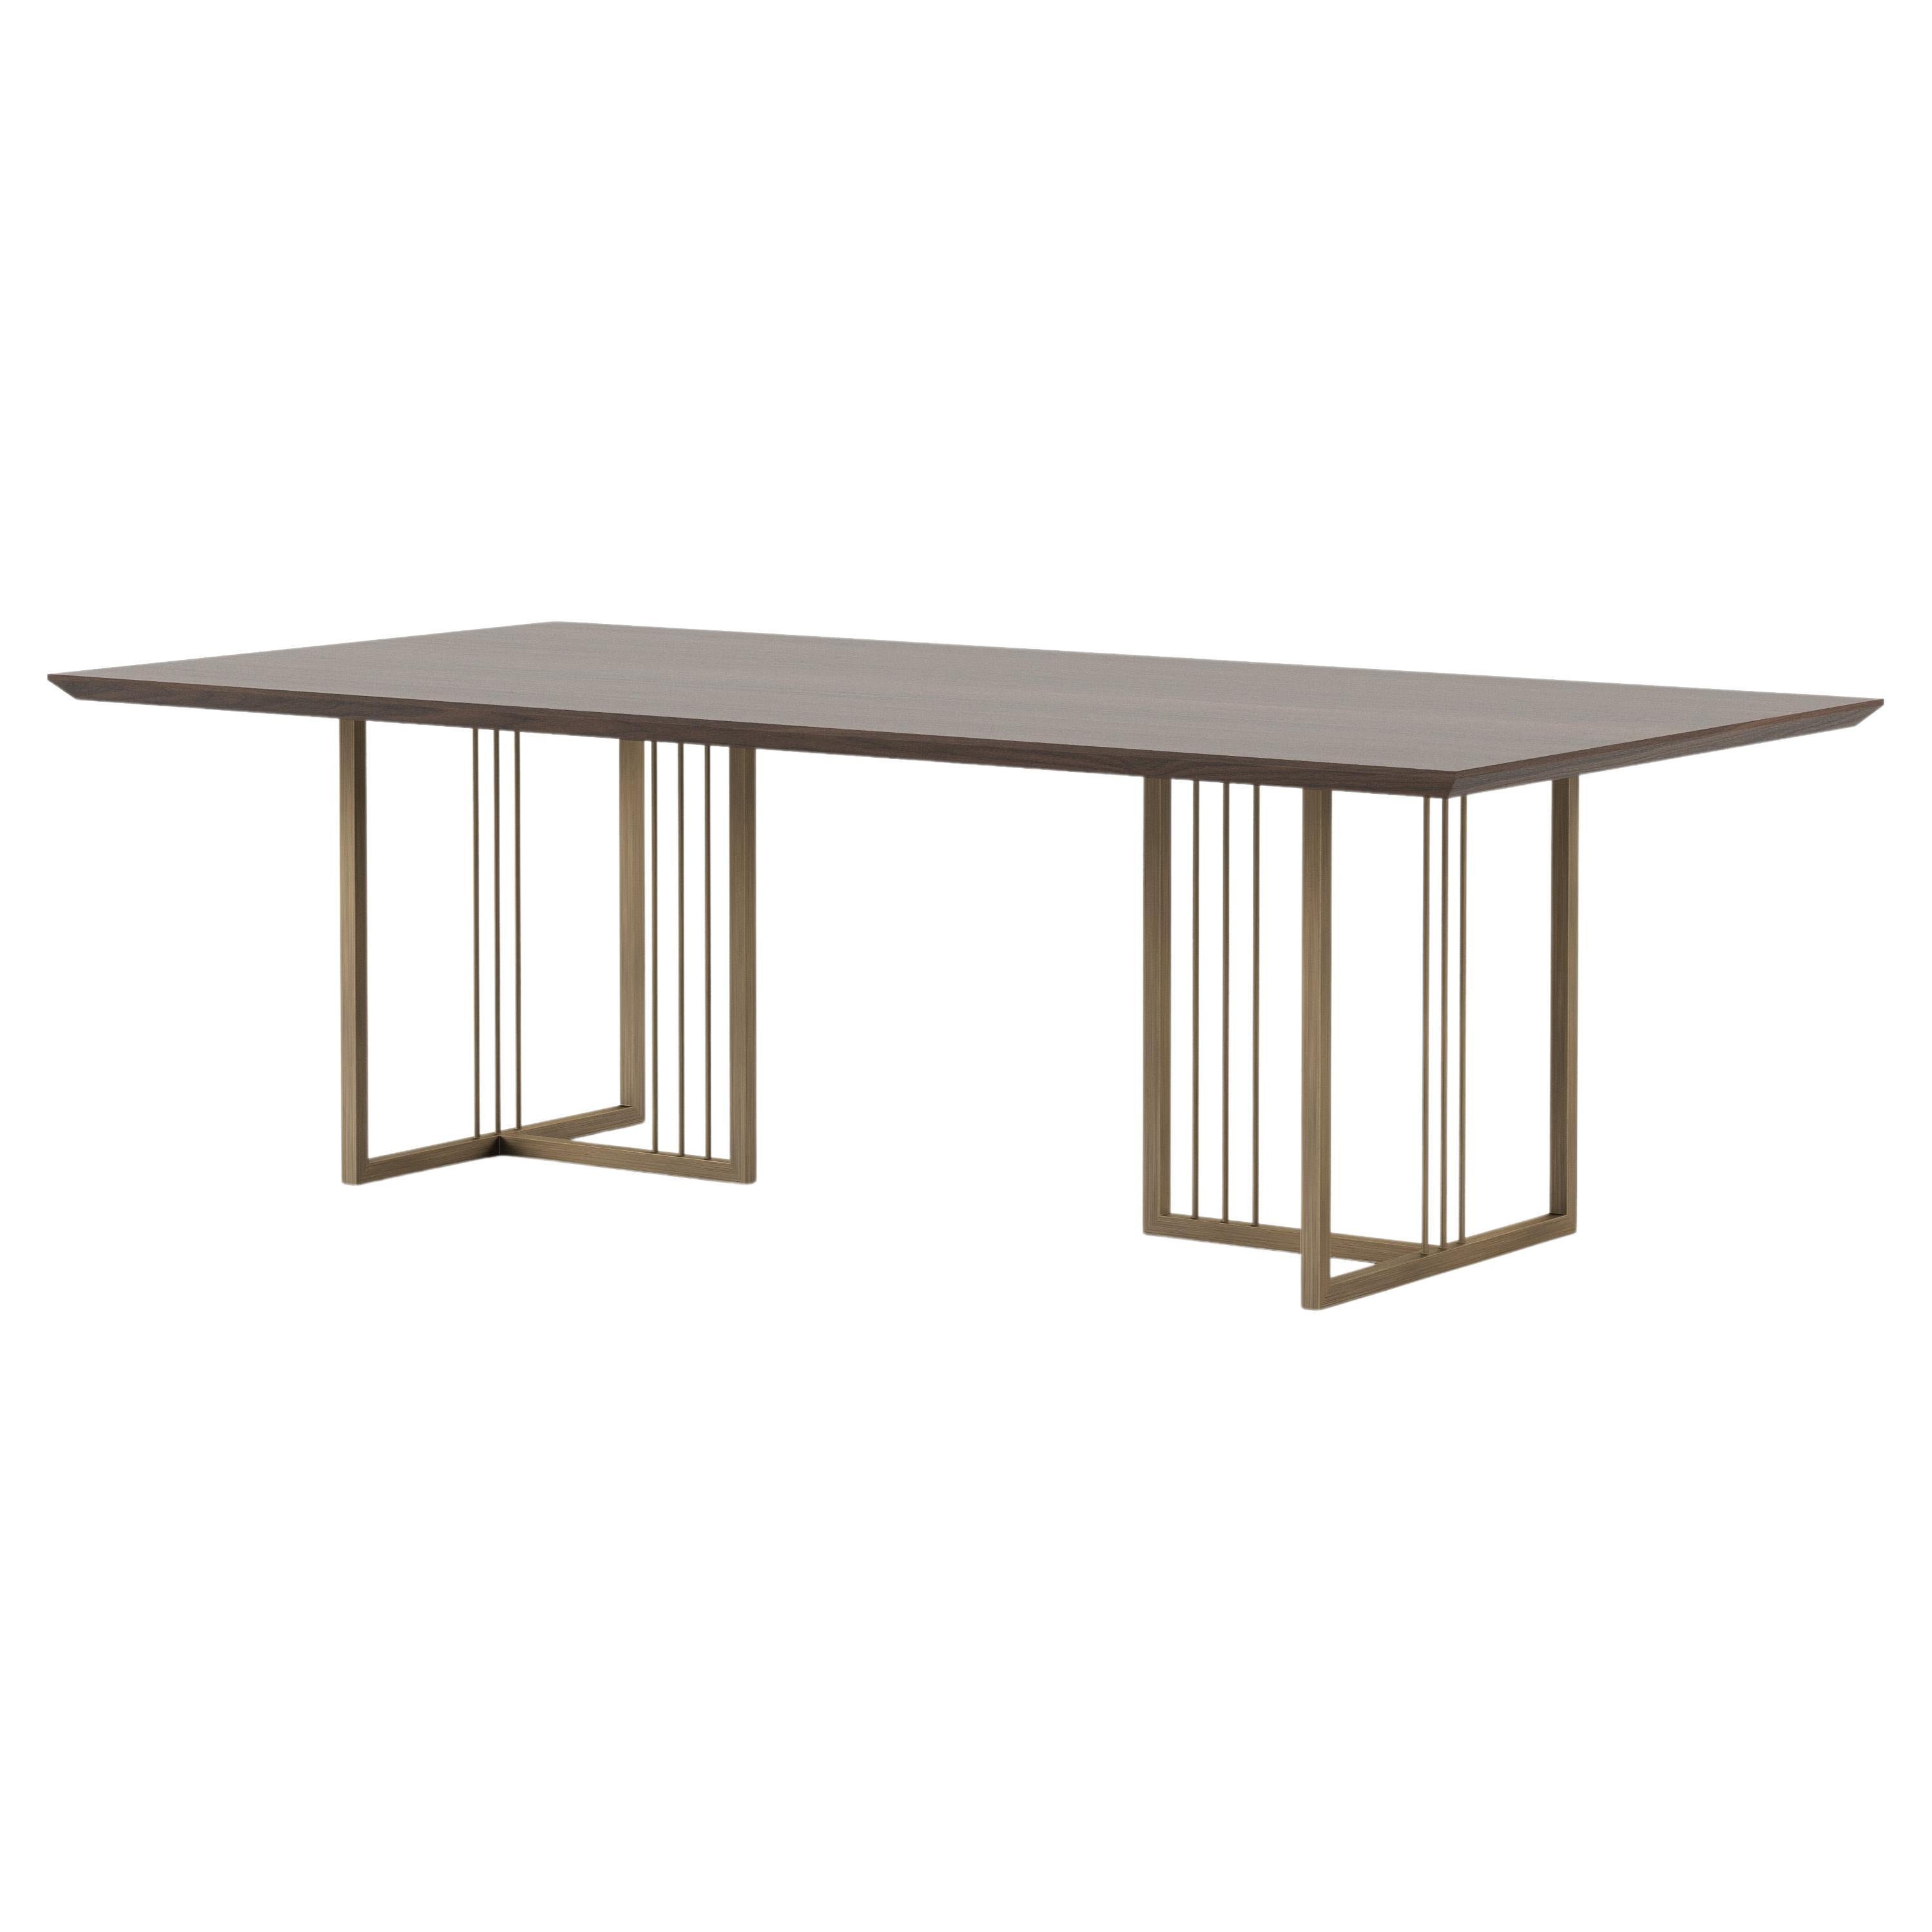 Scandinavian Modern Porto Dining Table Made with Walnut and Iron by Stylish Club